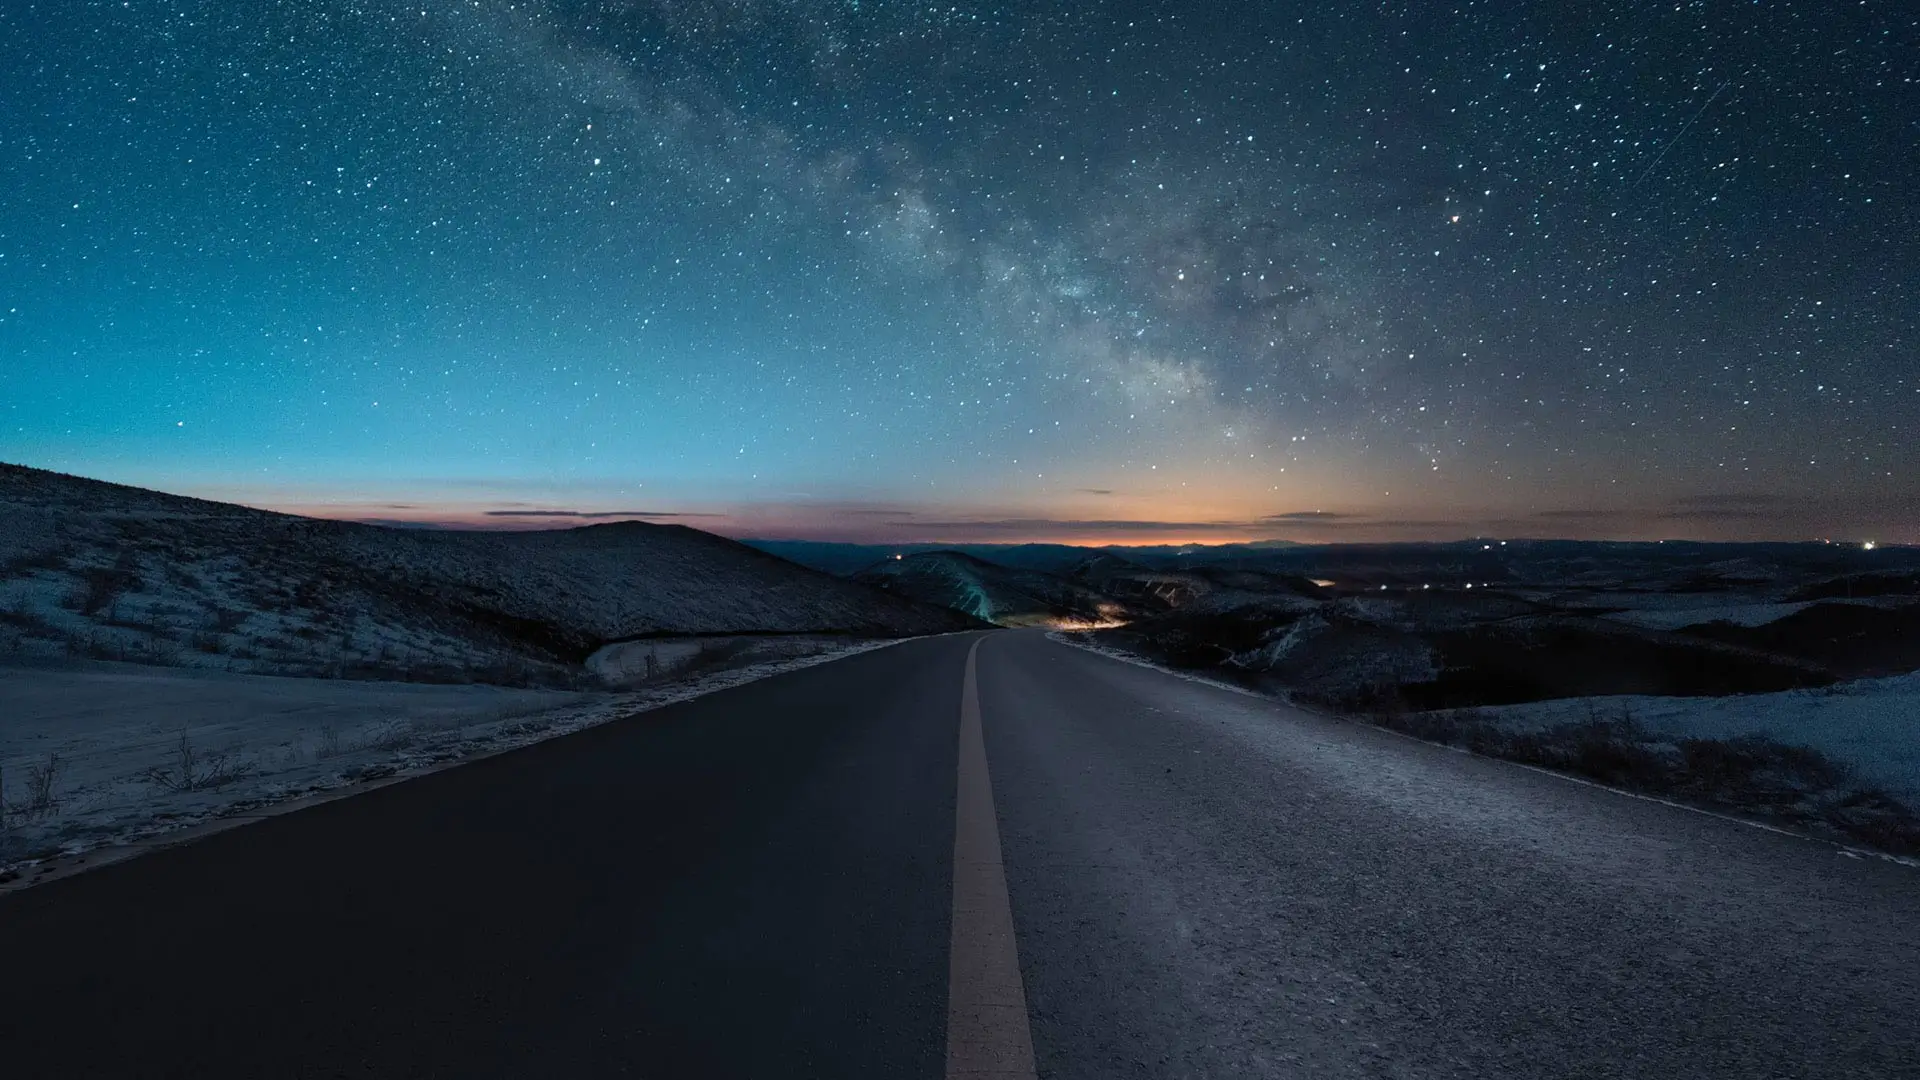 A beautiful empty road in a starry night